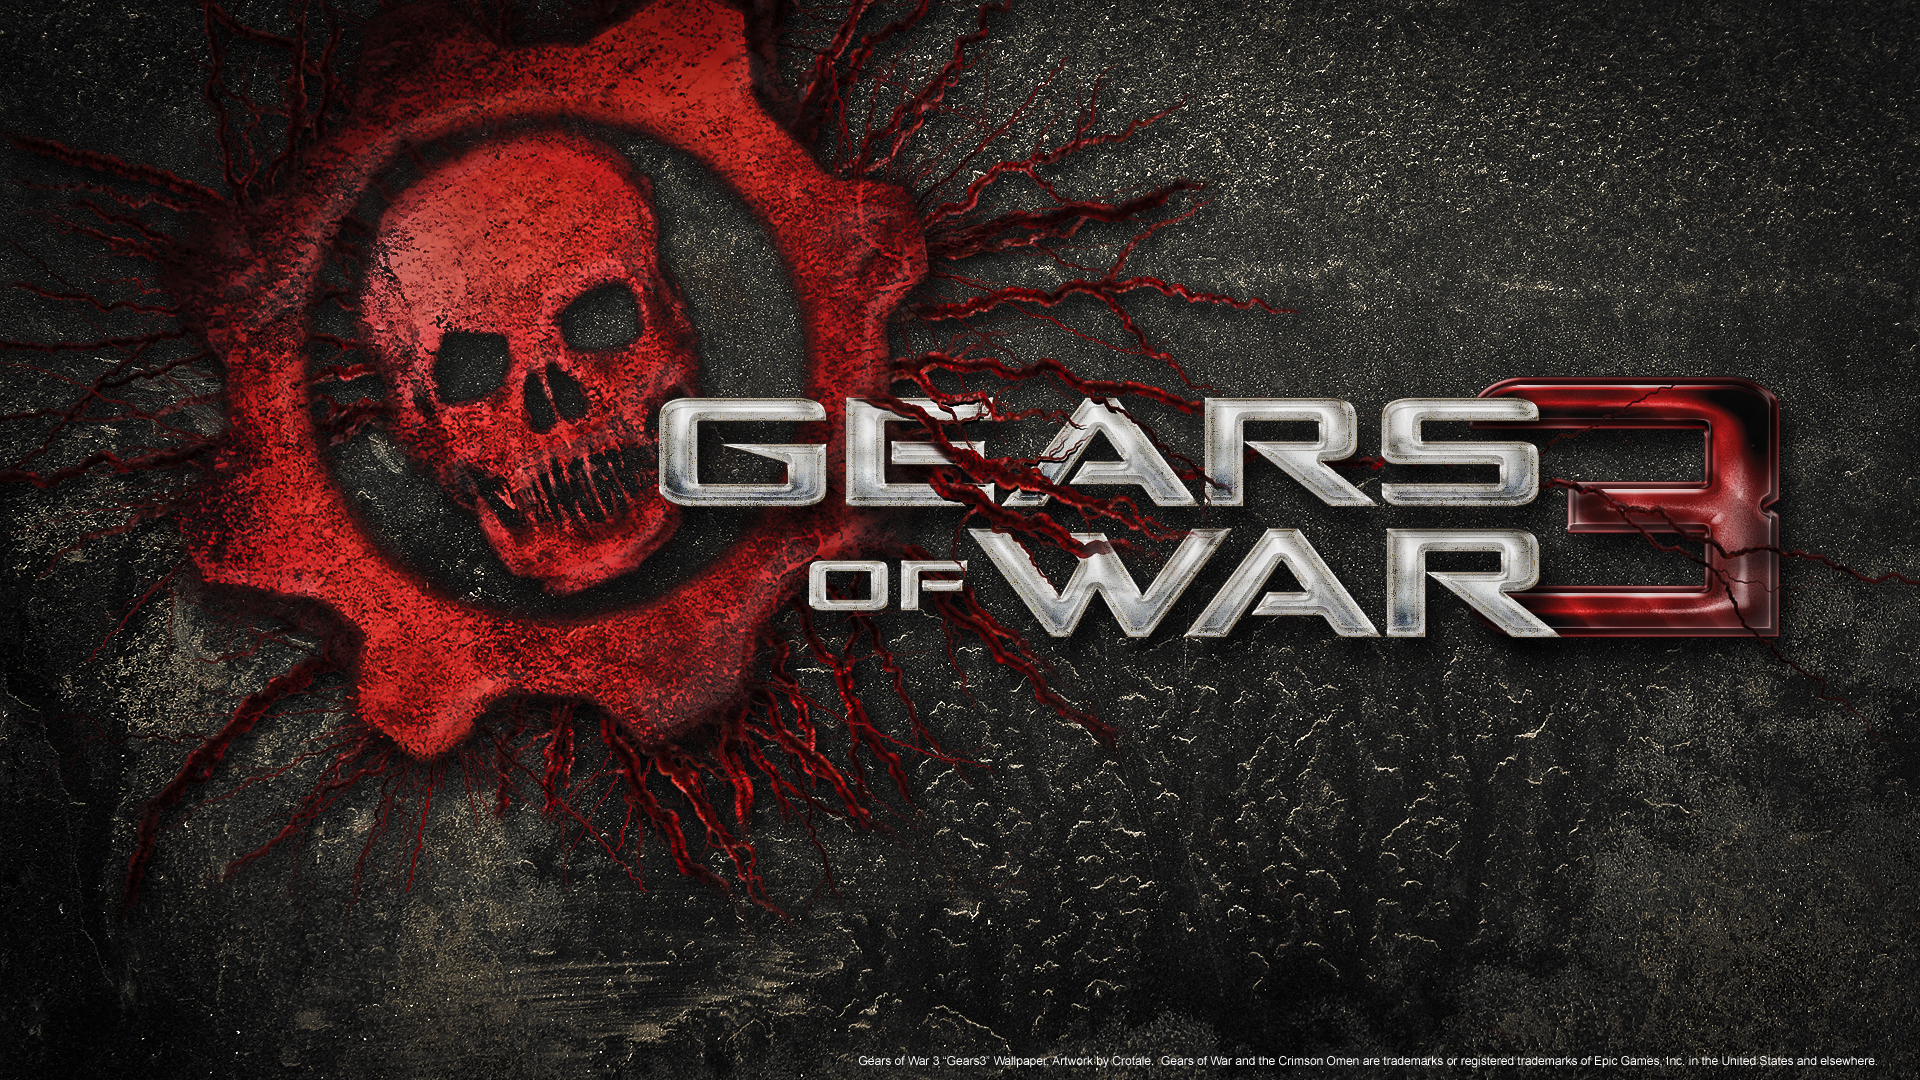 Third Update for Gears of War 3 Launches Today